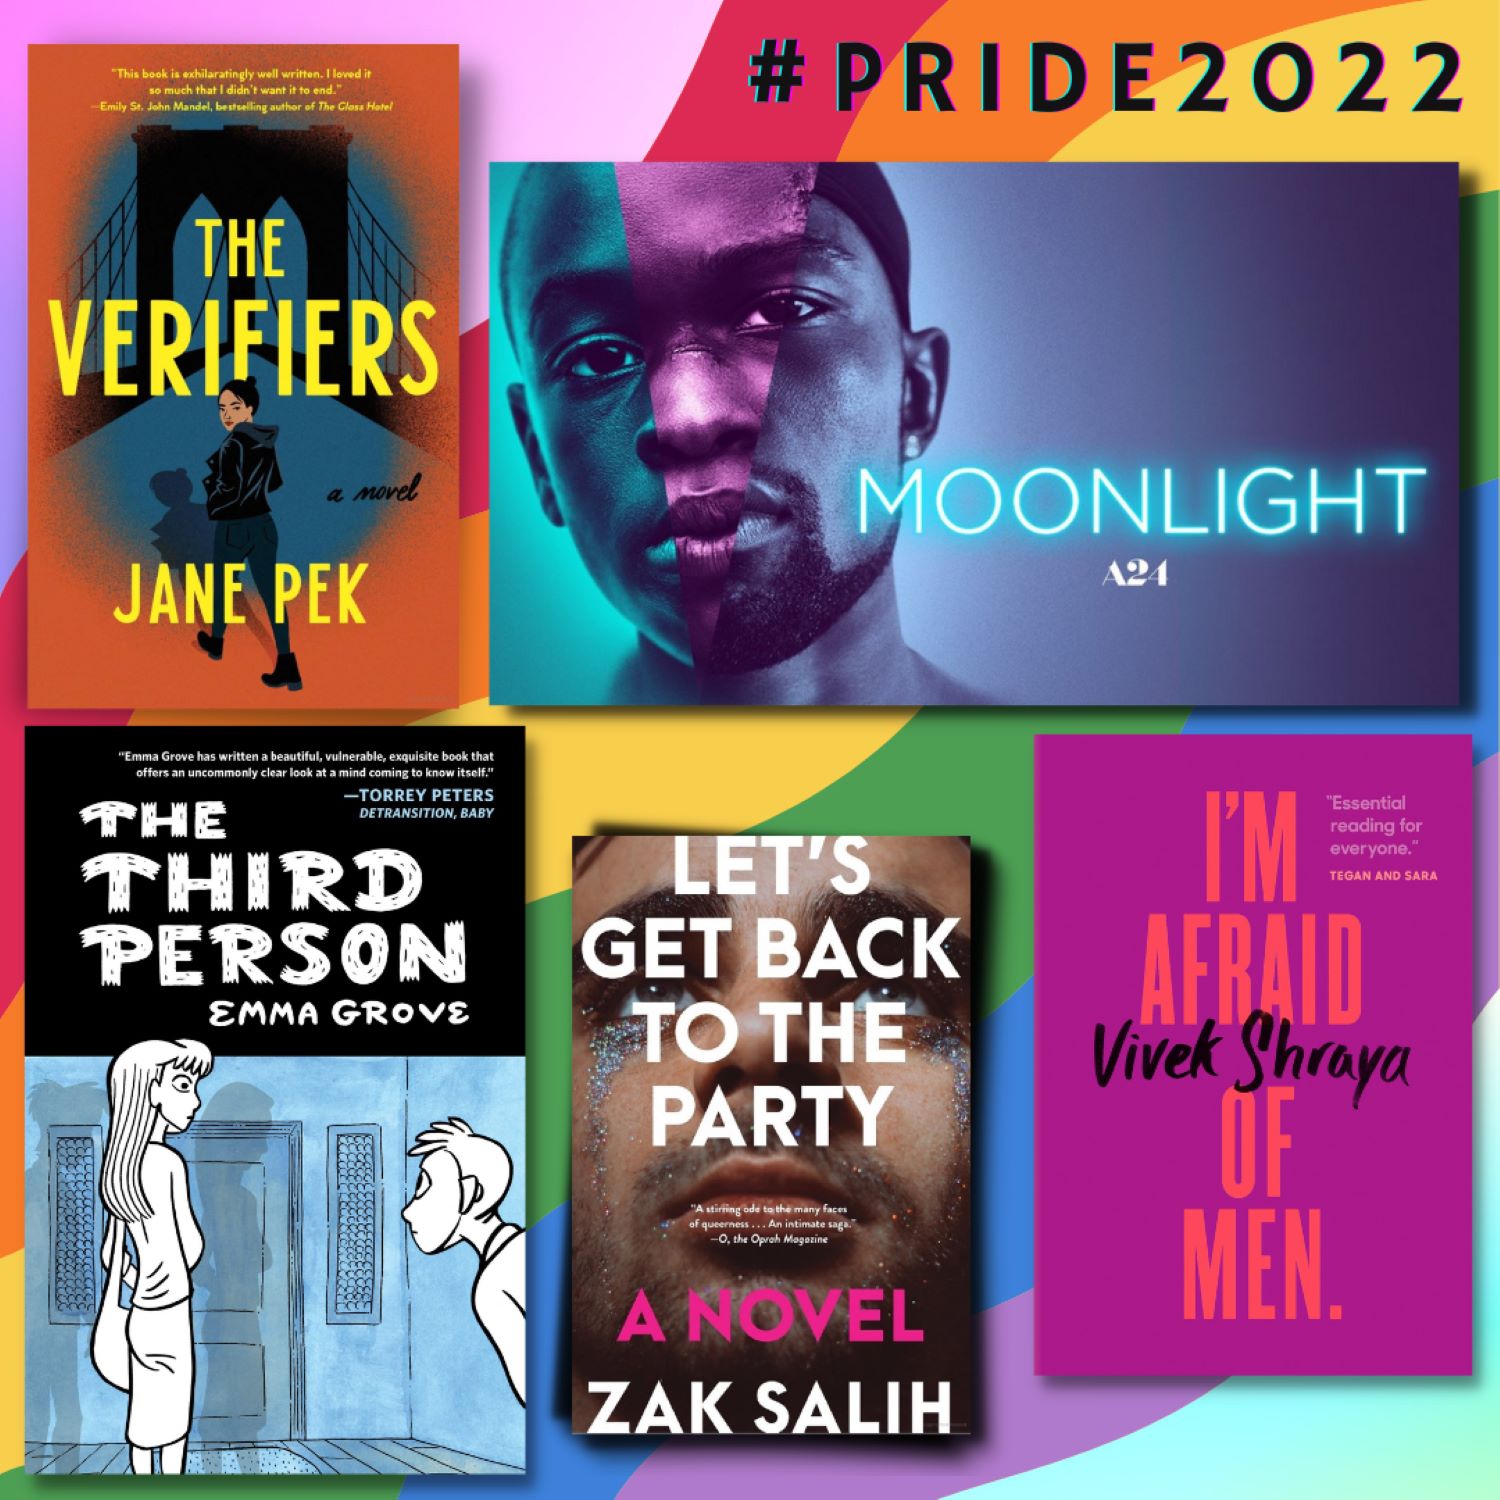 Happy #PRIDE, UVM! While much of the world celebrates Pride month in June, Vermonters get the special chance to also celebrate in September! If you’re looking for ways to celebrate even more, take a look at Howe Library’s Pride 2022 list of queer film, fiction, & memoirs centered around queer life & JOY. You’ll find these titles and so much more all available from the Howe Library. Stay safe and enjoy all that Vermont Pride has to offer! Link in bio. #BVTPride #VermontPride #tbr #movies #HoweMemorialLibrary #UVMLibraries #UVM #librariesofinstagram #SeptebmerPride #fiction #essays #memoir